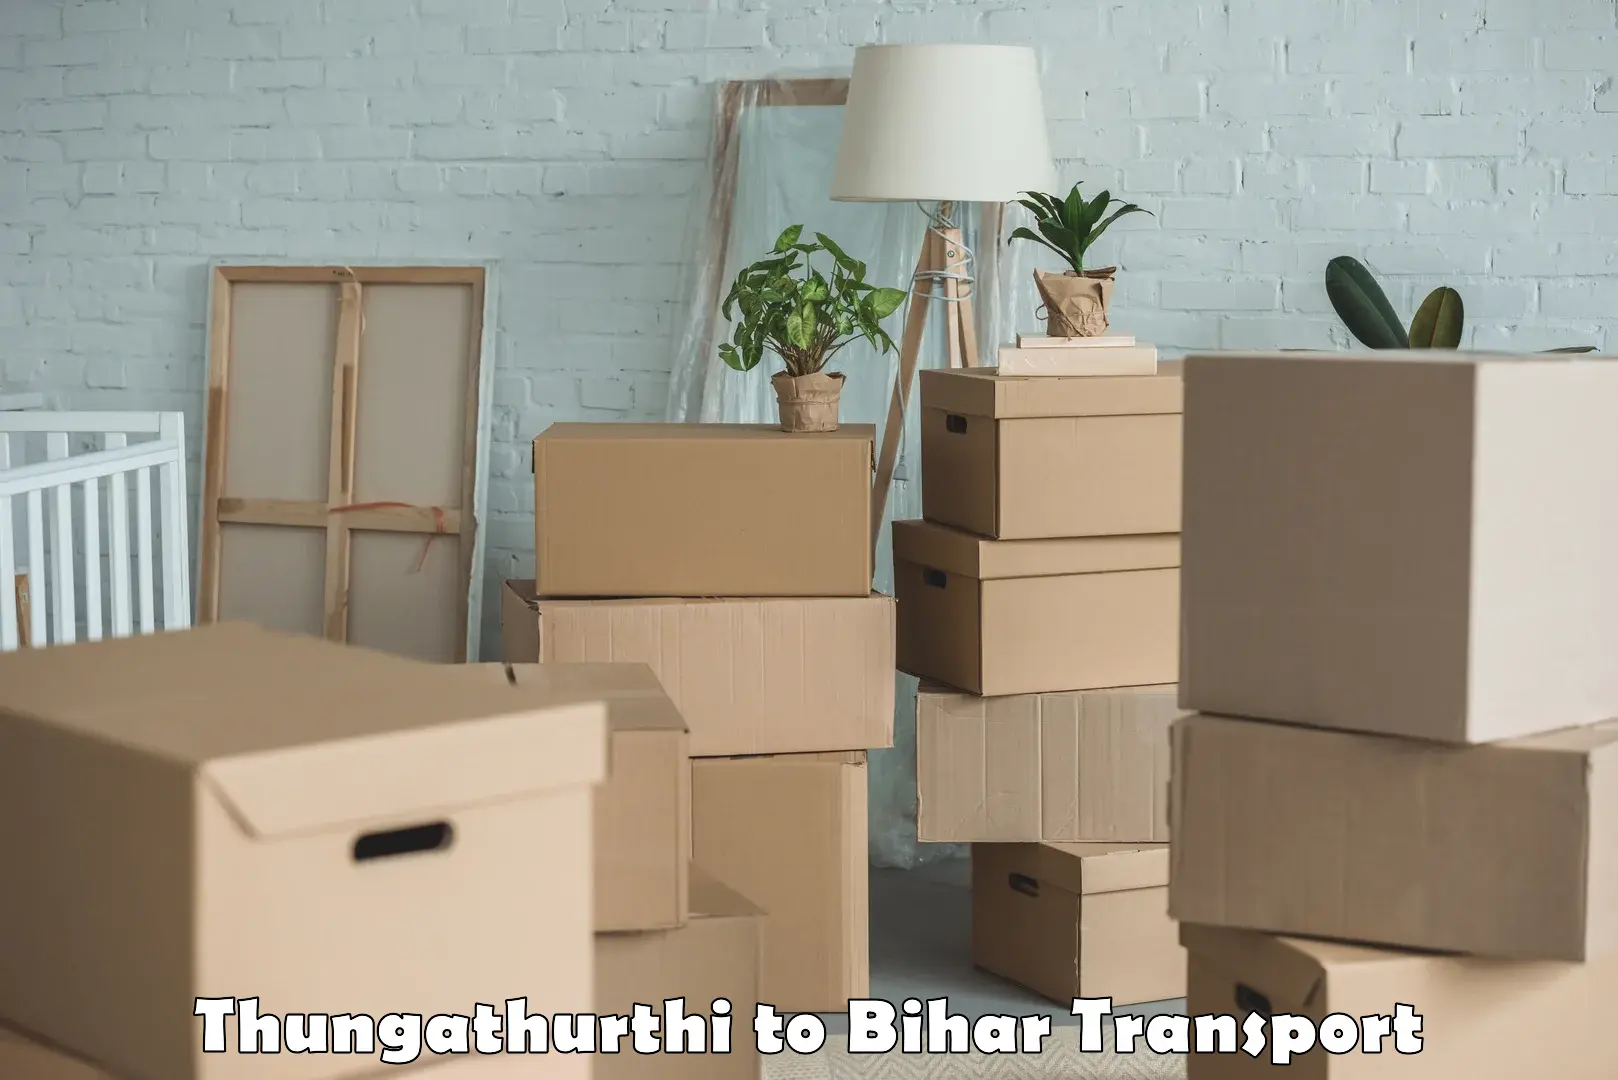 Commercial transport service Thungathurthi to Bihar